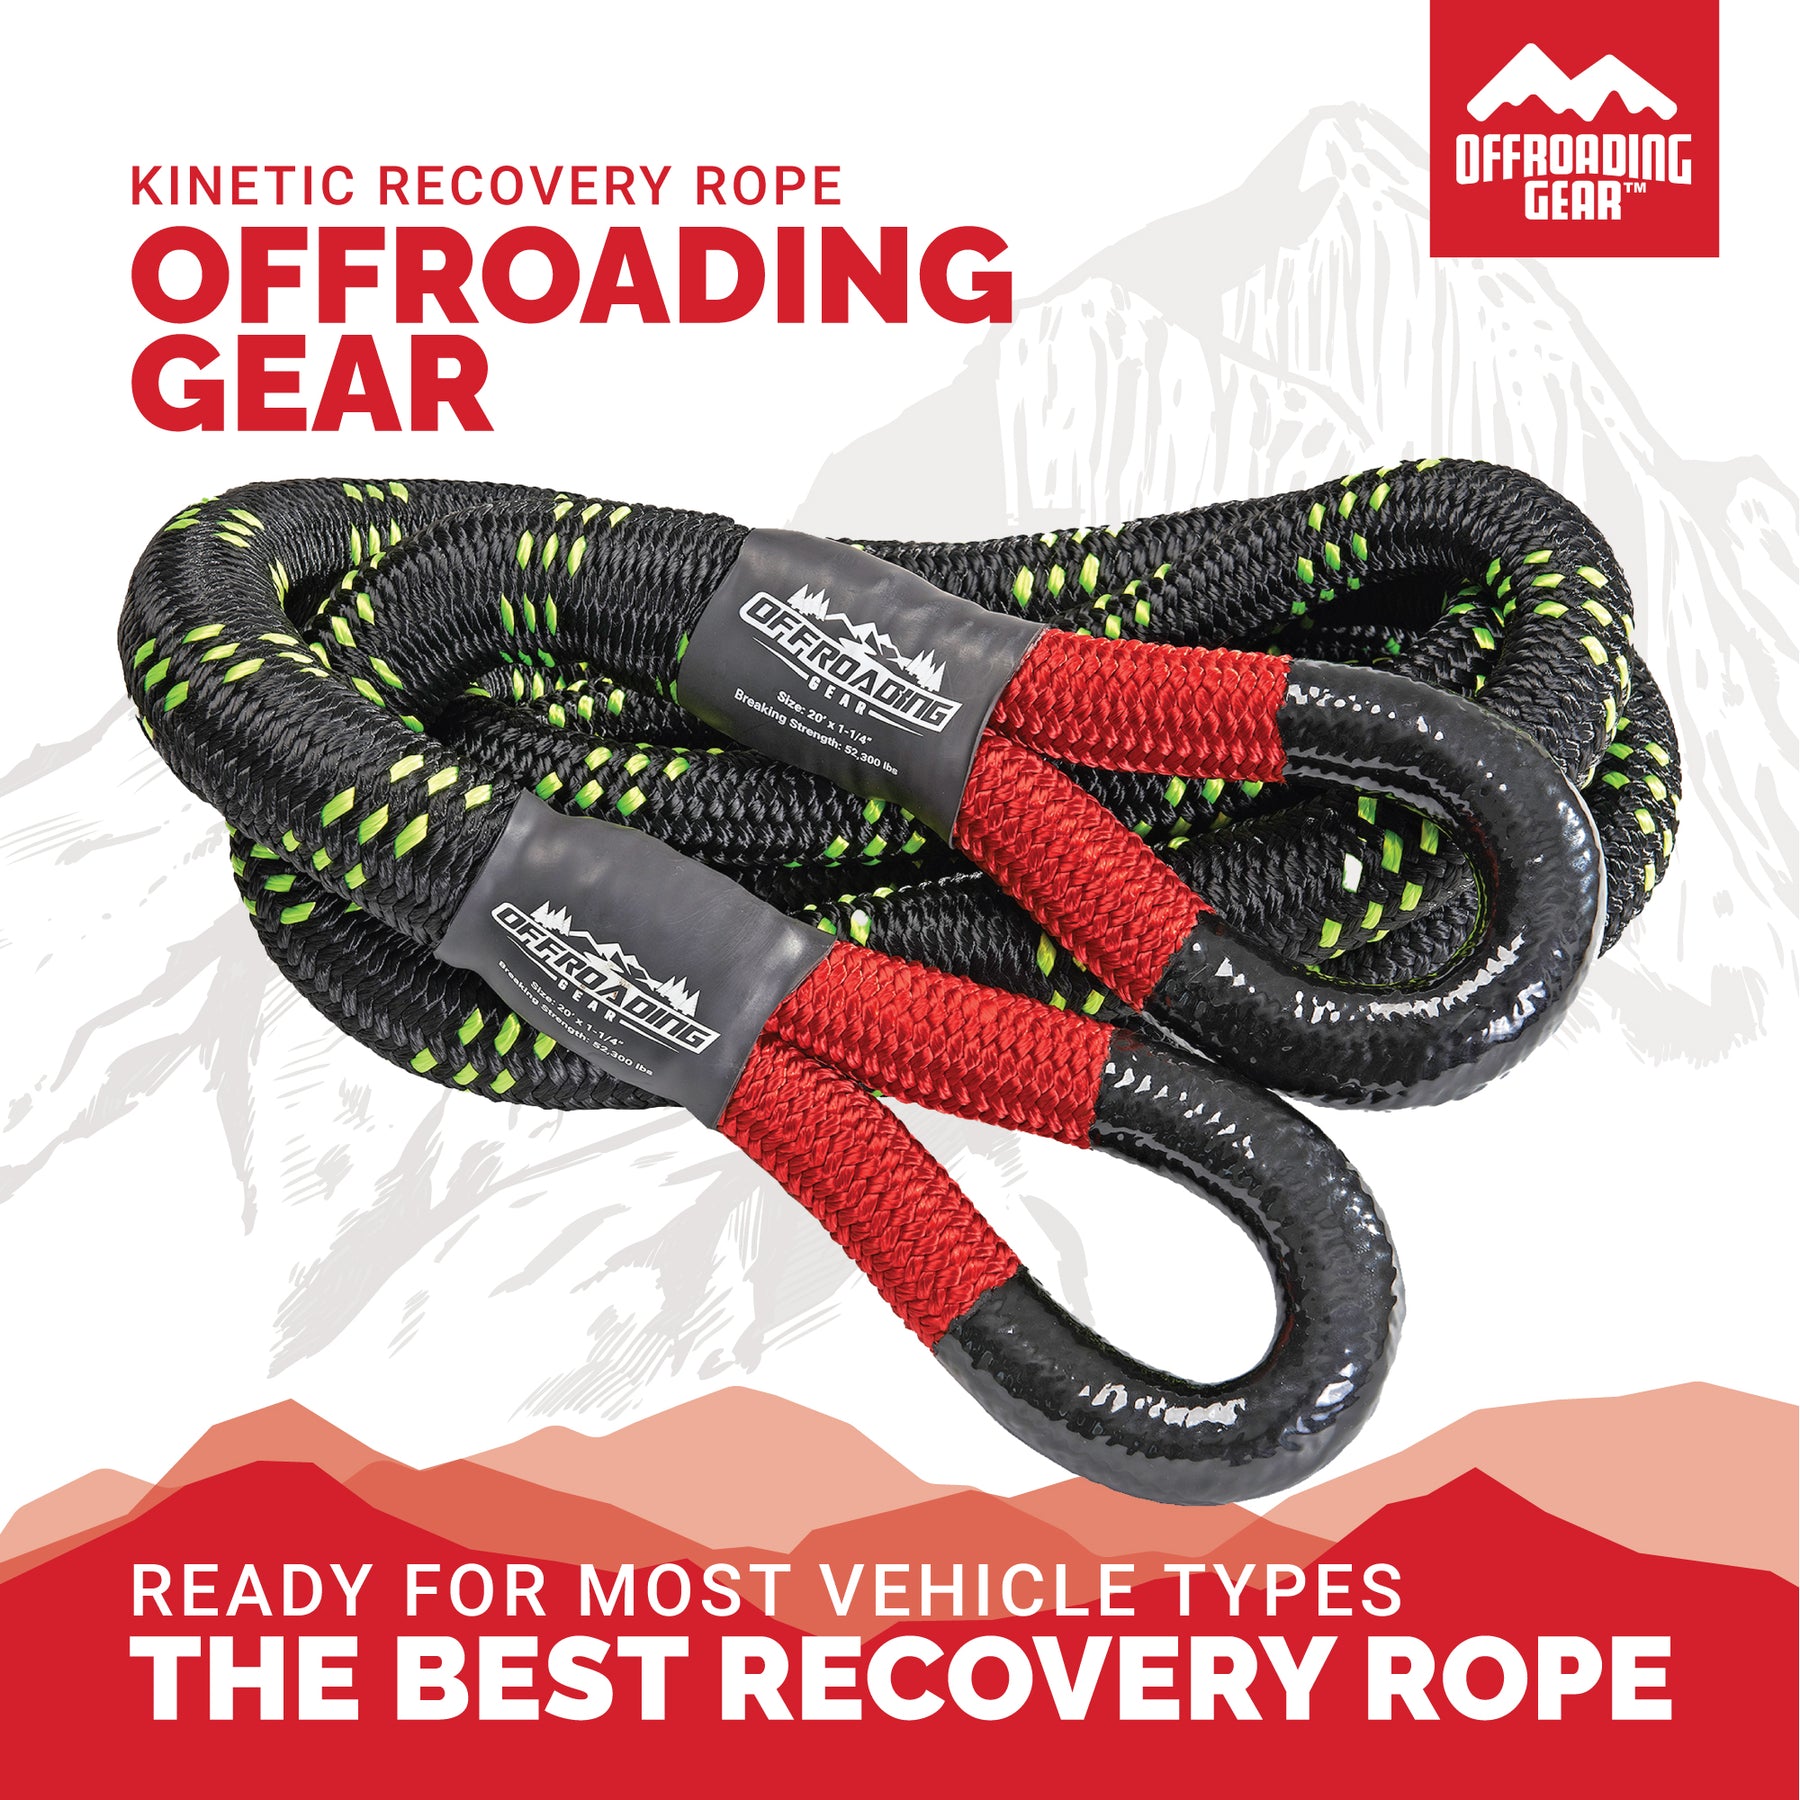 Offroading Gear Kinetic Recovery & Tow Rope, Elastic Snatch Strap